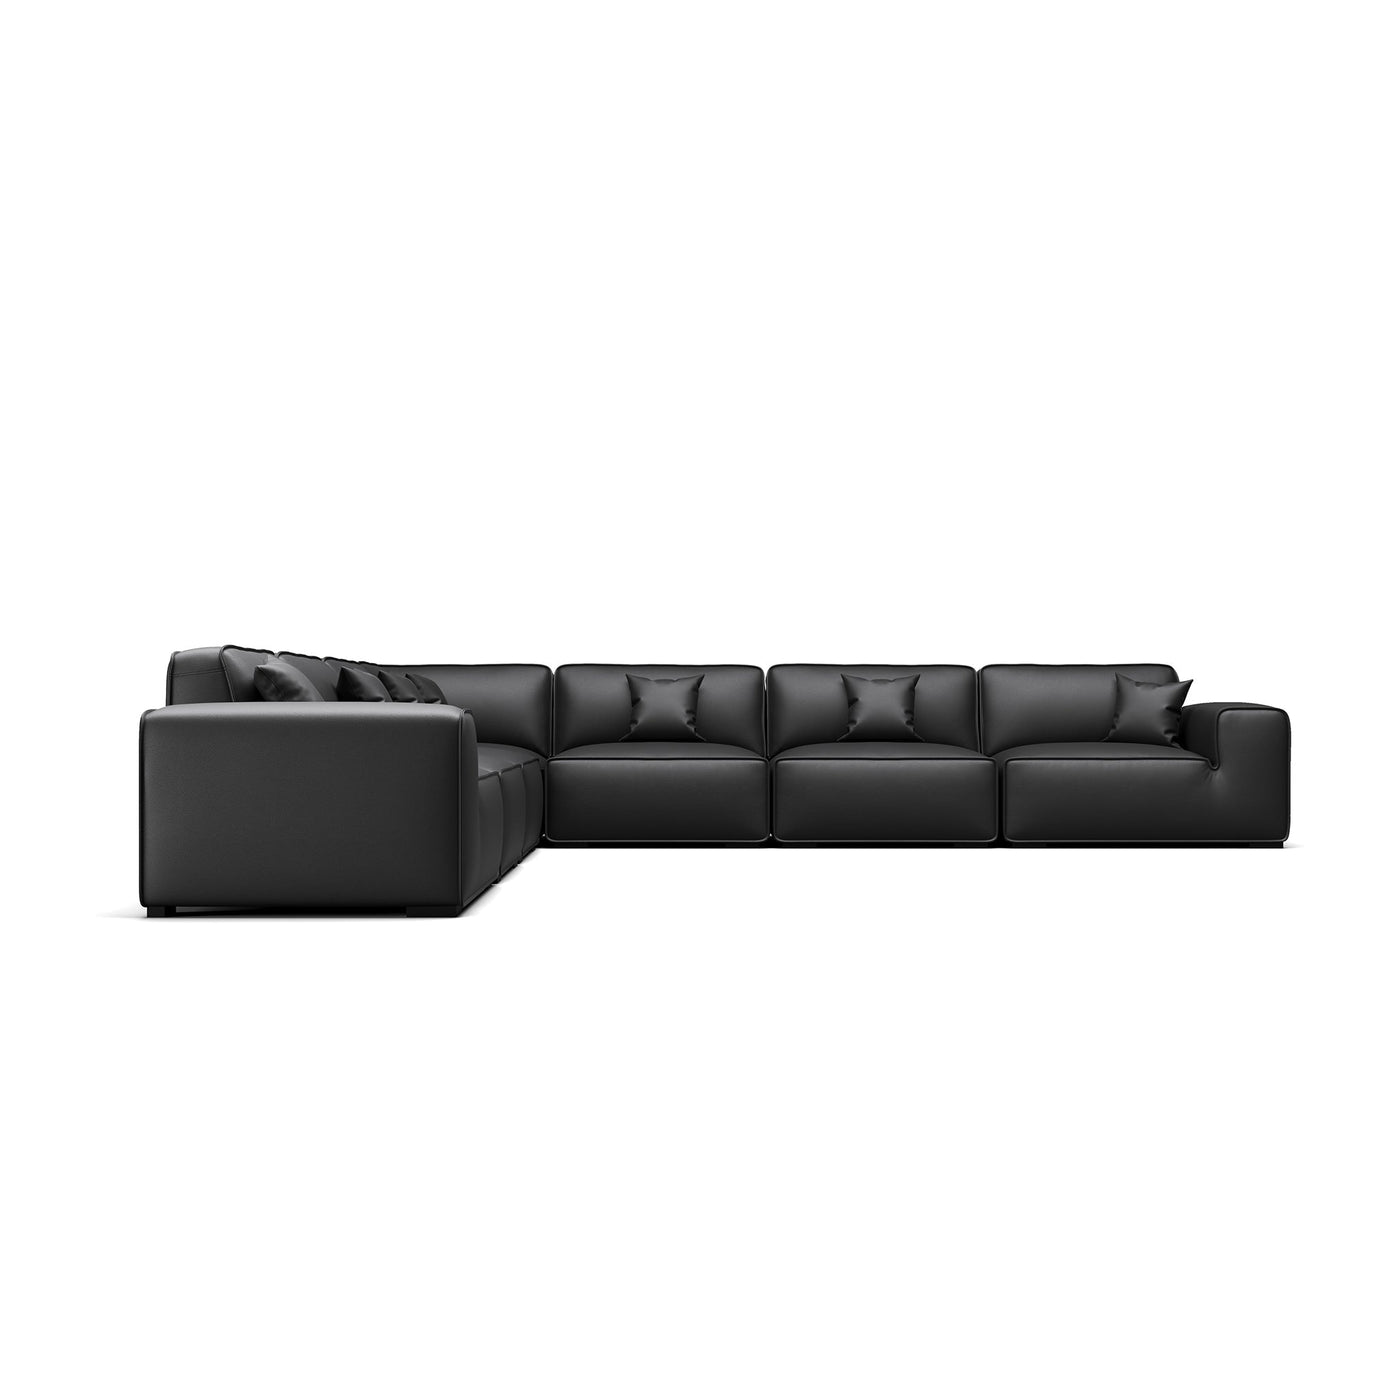 Domus Modular Dark Gray Leather L Shaped Sectional-Black-7 Seater 162.2″